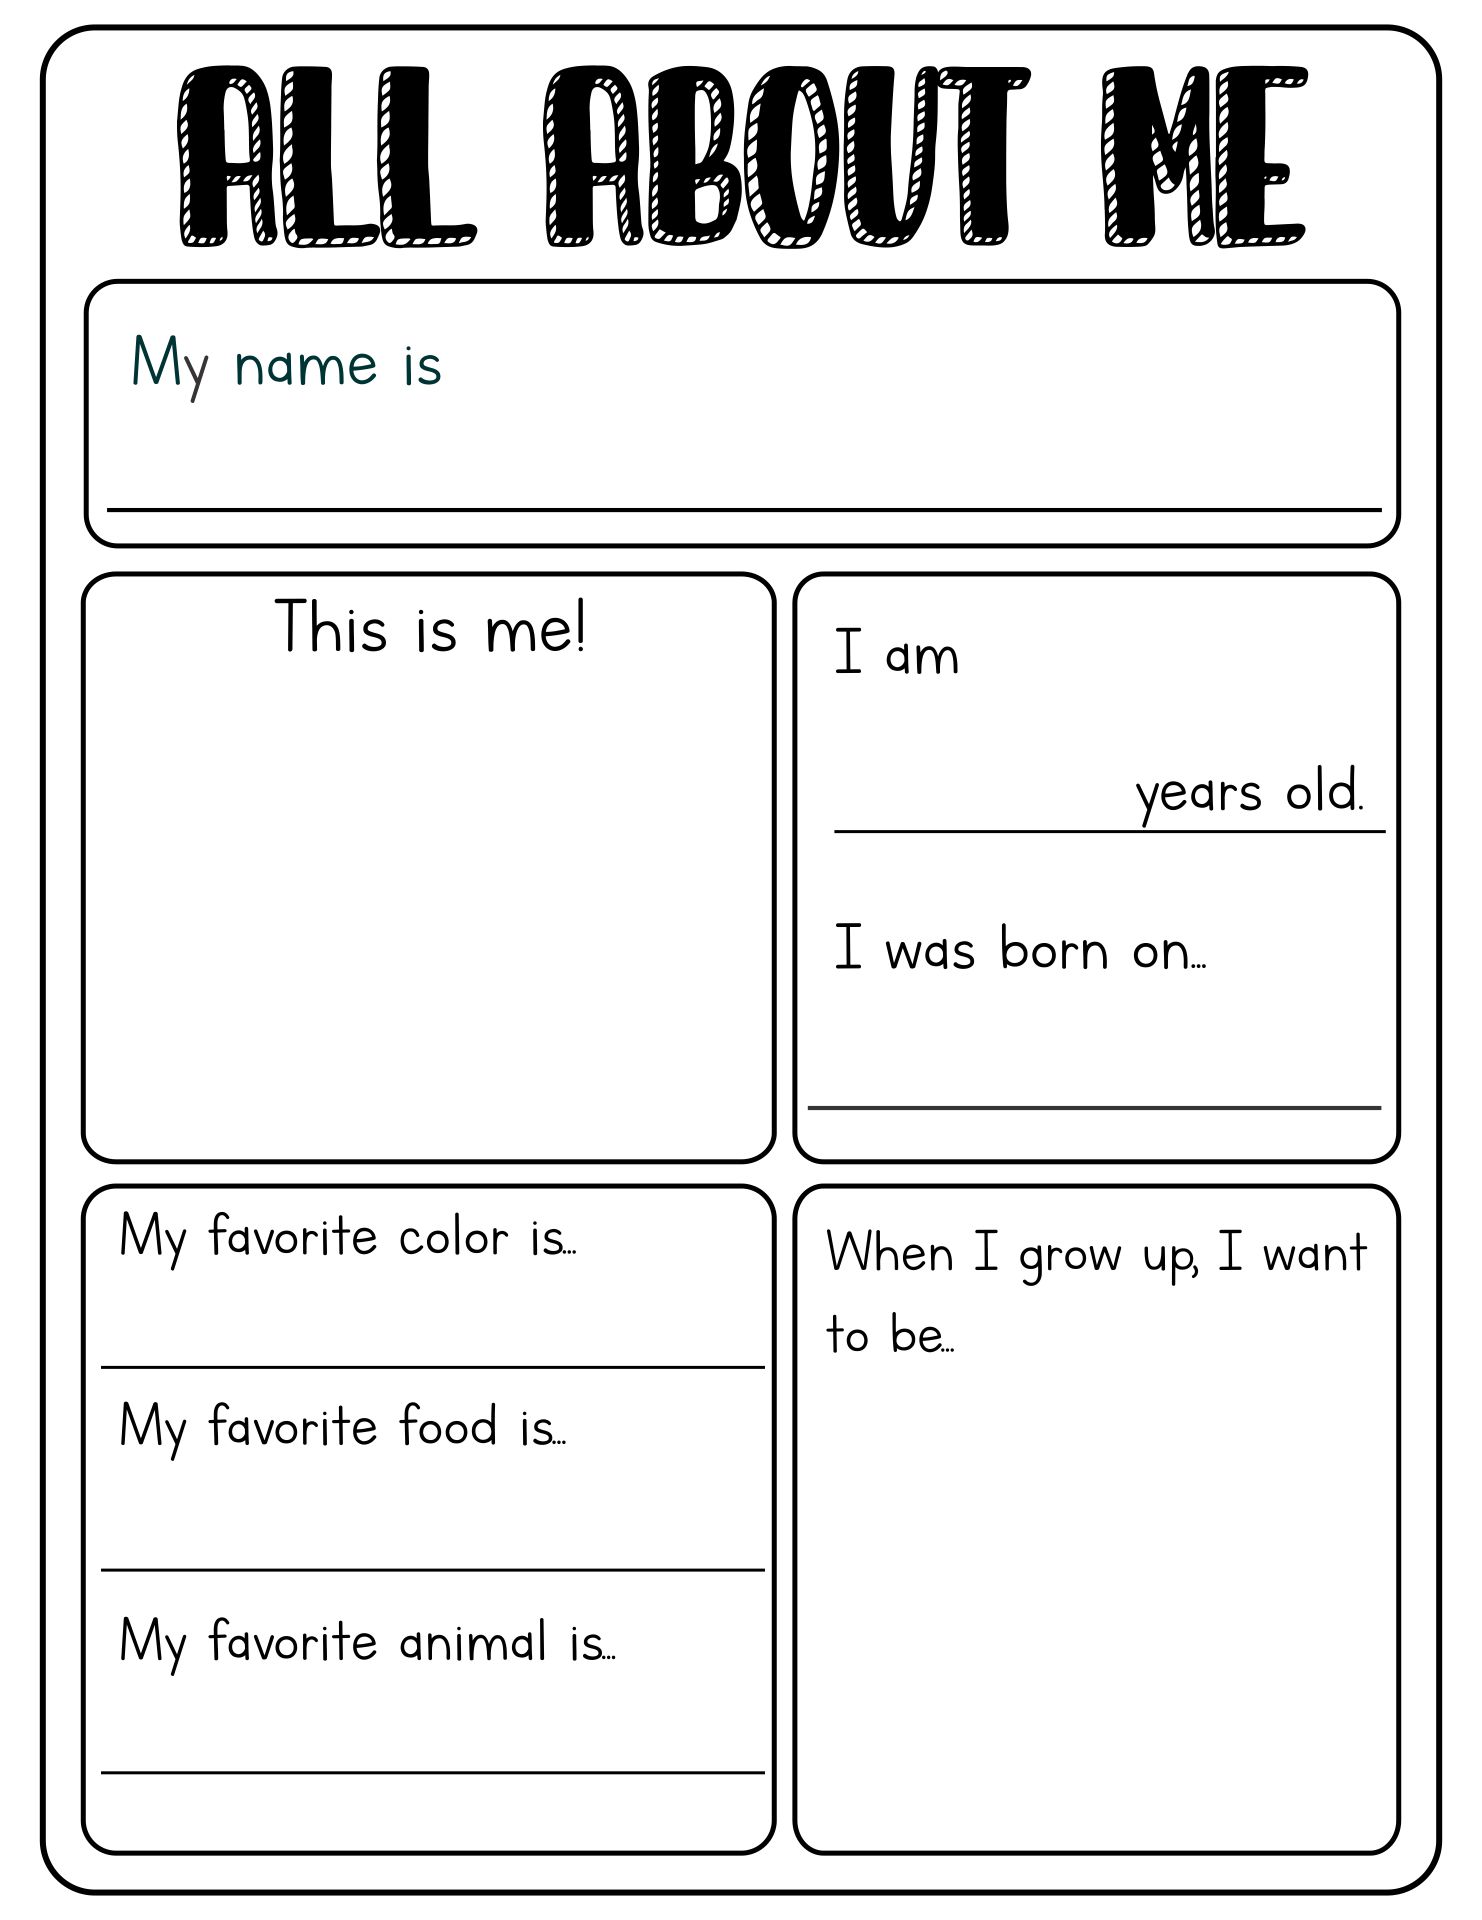 free-printable-all-about-me-worksheet-modern-homeschool-family-free